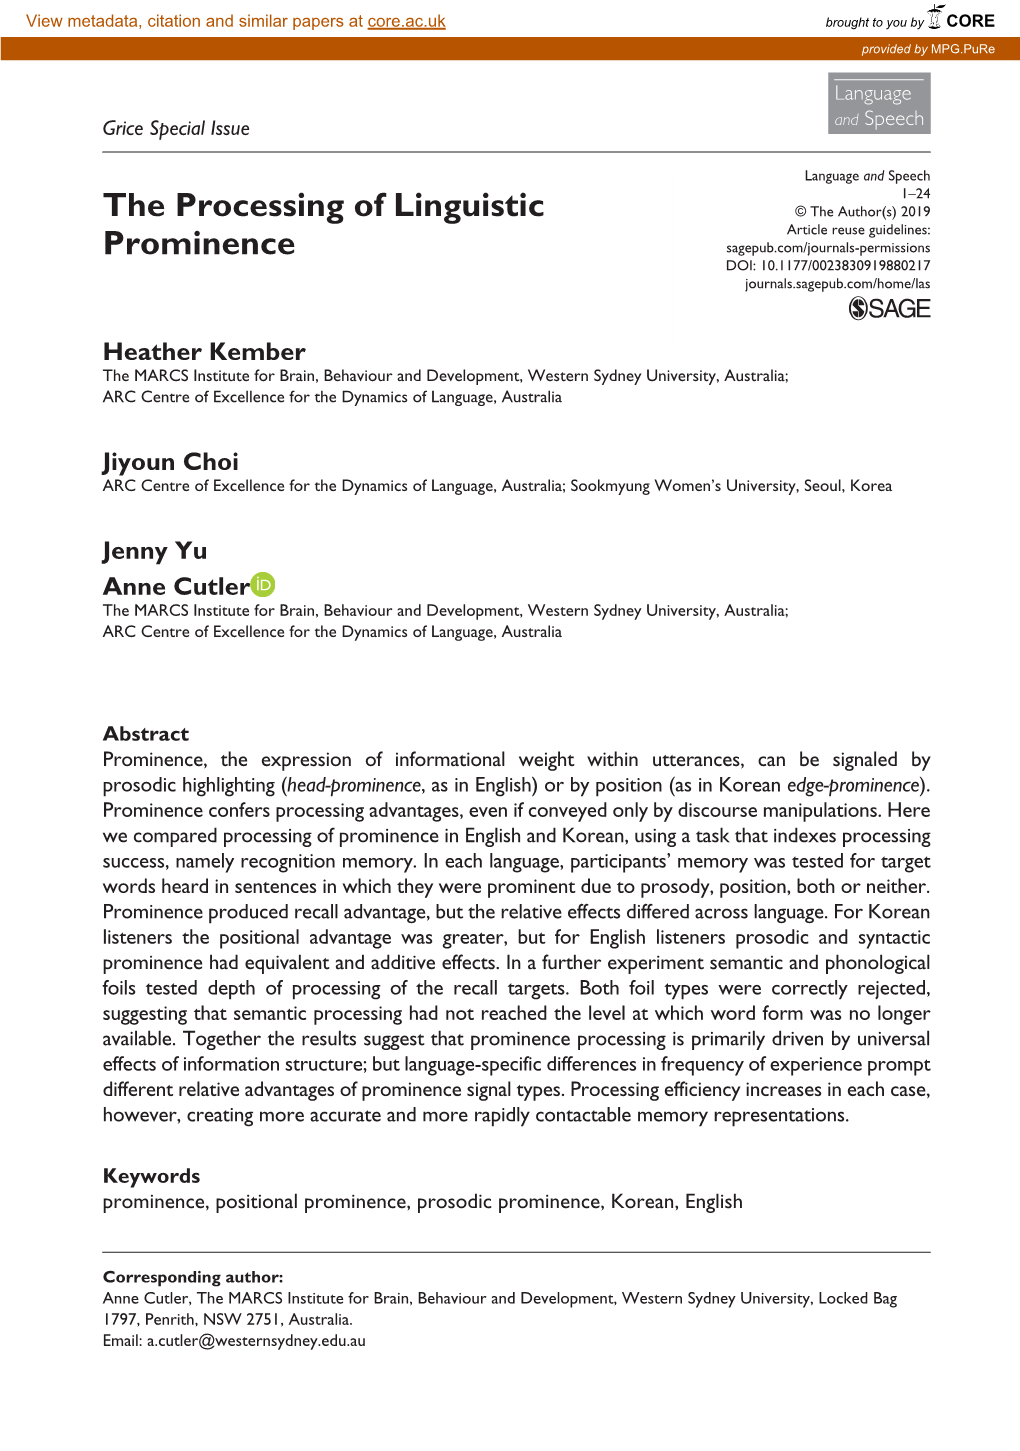 The Processing of Linguistic Prominence